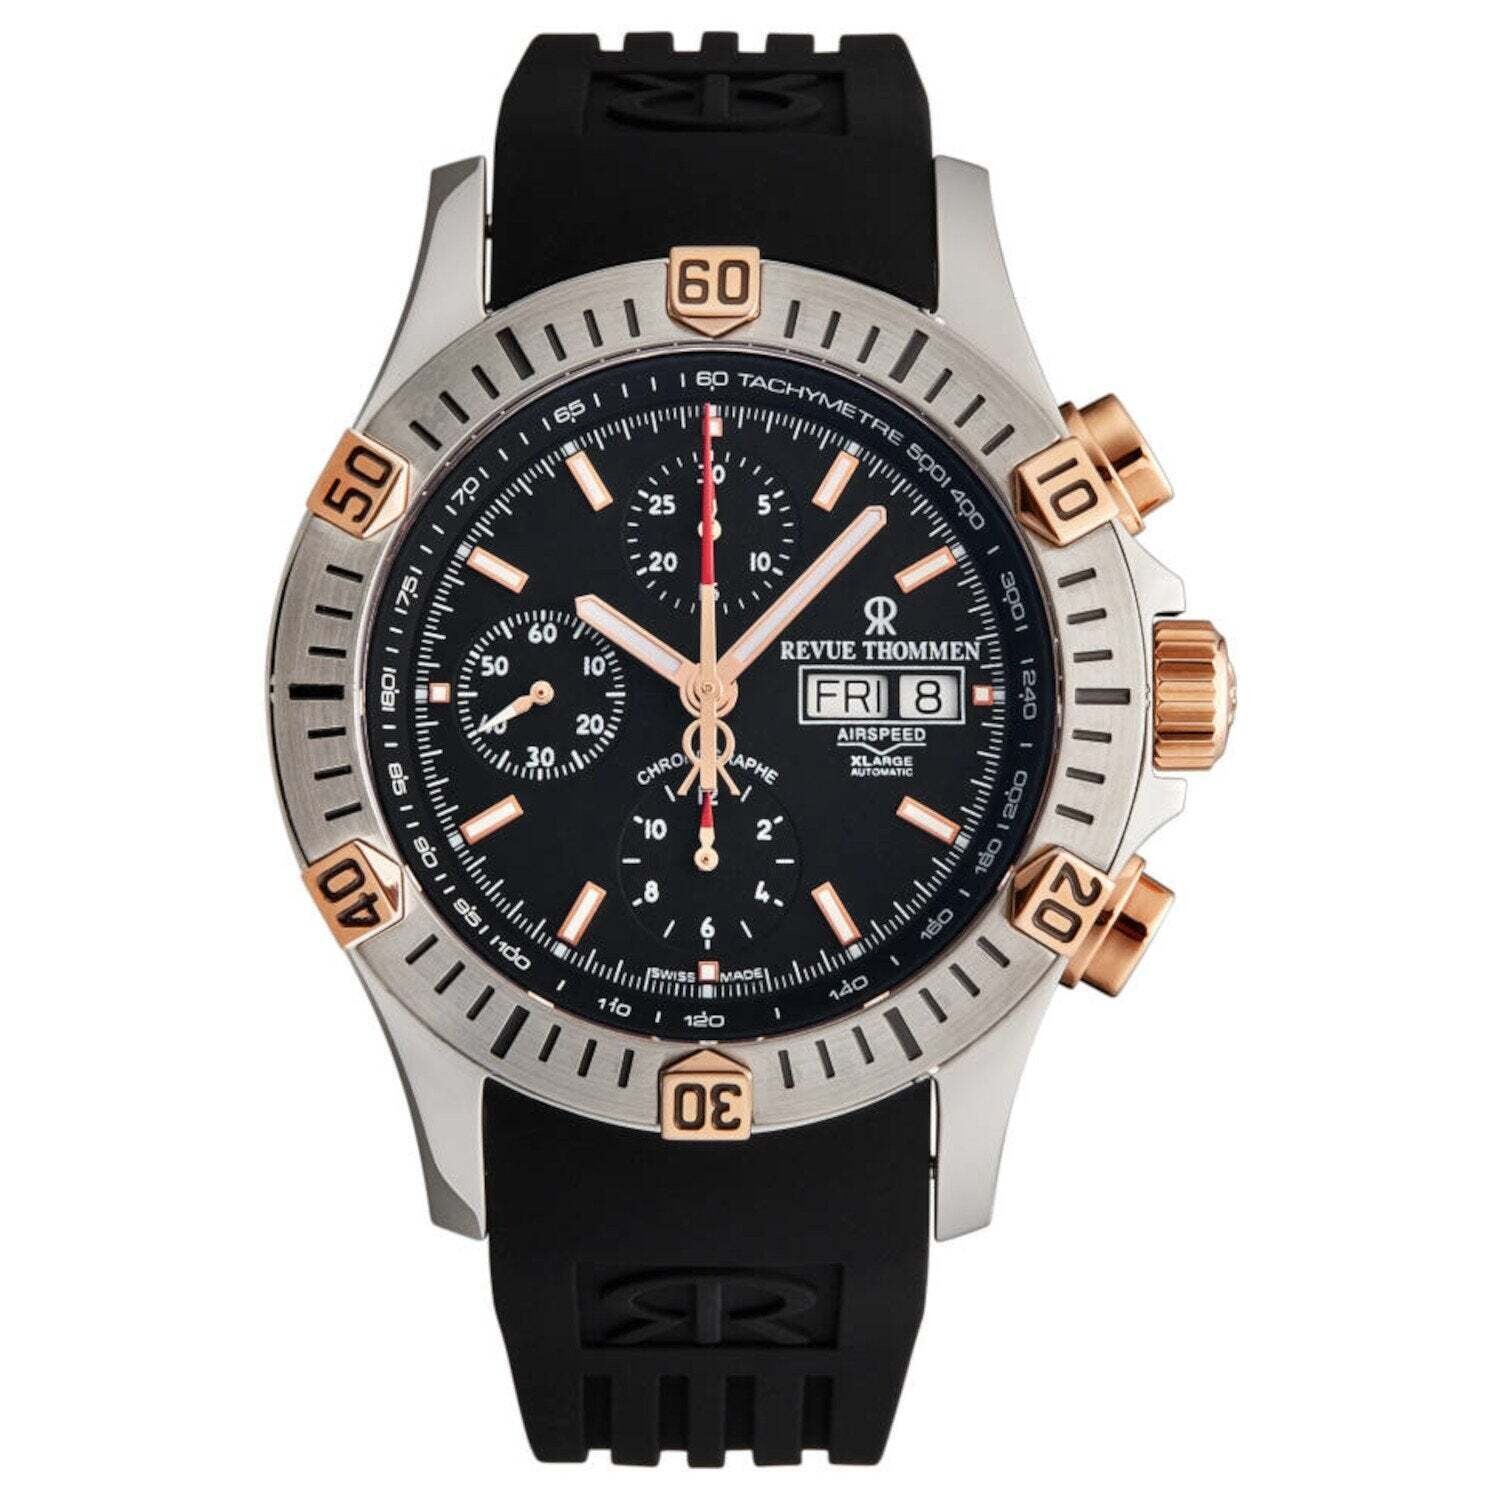 Revue Thommen 16071.6859 Men's 'Airspeed' Black Dial Day-Date Chronograph Automatic Watch